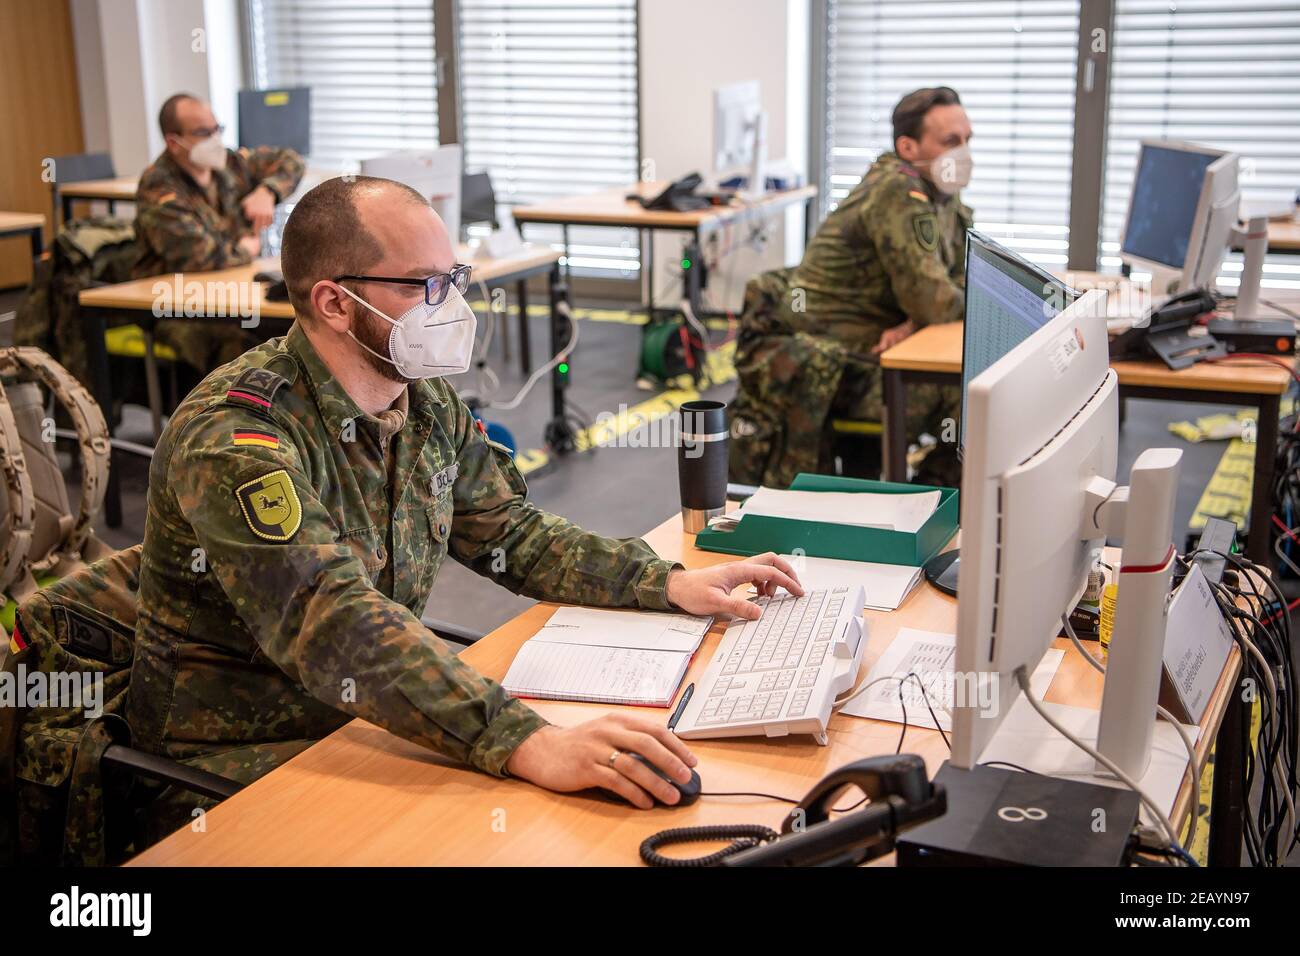 Oldenburg, Germany. 11th Feb, 2021. Soldiers of the Bundeswehr work in the situation centre. The 1st Armoured Division in Oldenburg is organising assistance in the Corona pandemic in five federal states as the Regional Command Staff West: North Rhine-Westphalia, Hesse, Lower Saxony, Bremen and Saxony-Anhalt. Credit: Sina Schuldt/dpa/Alamy Live News Stock Photo